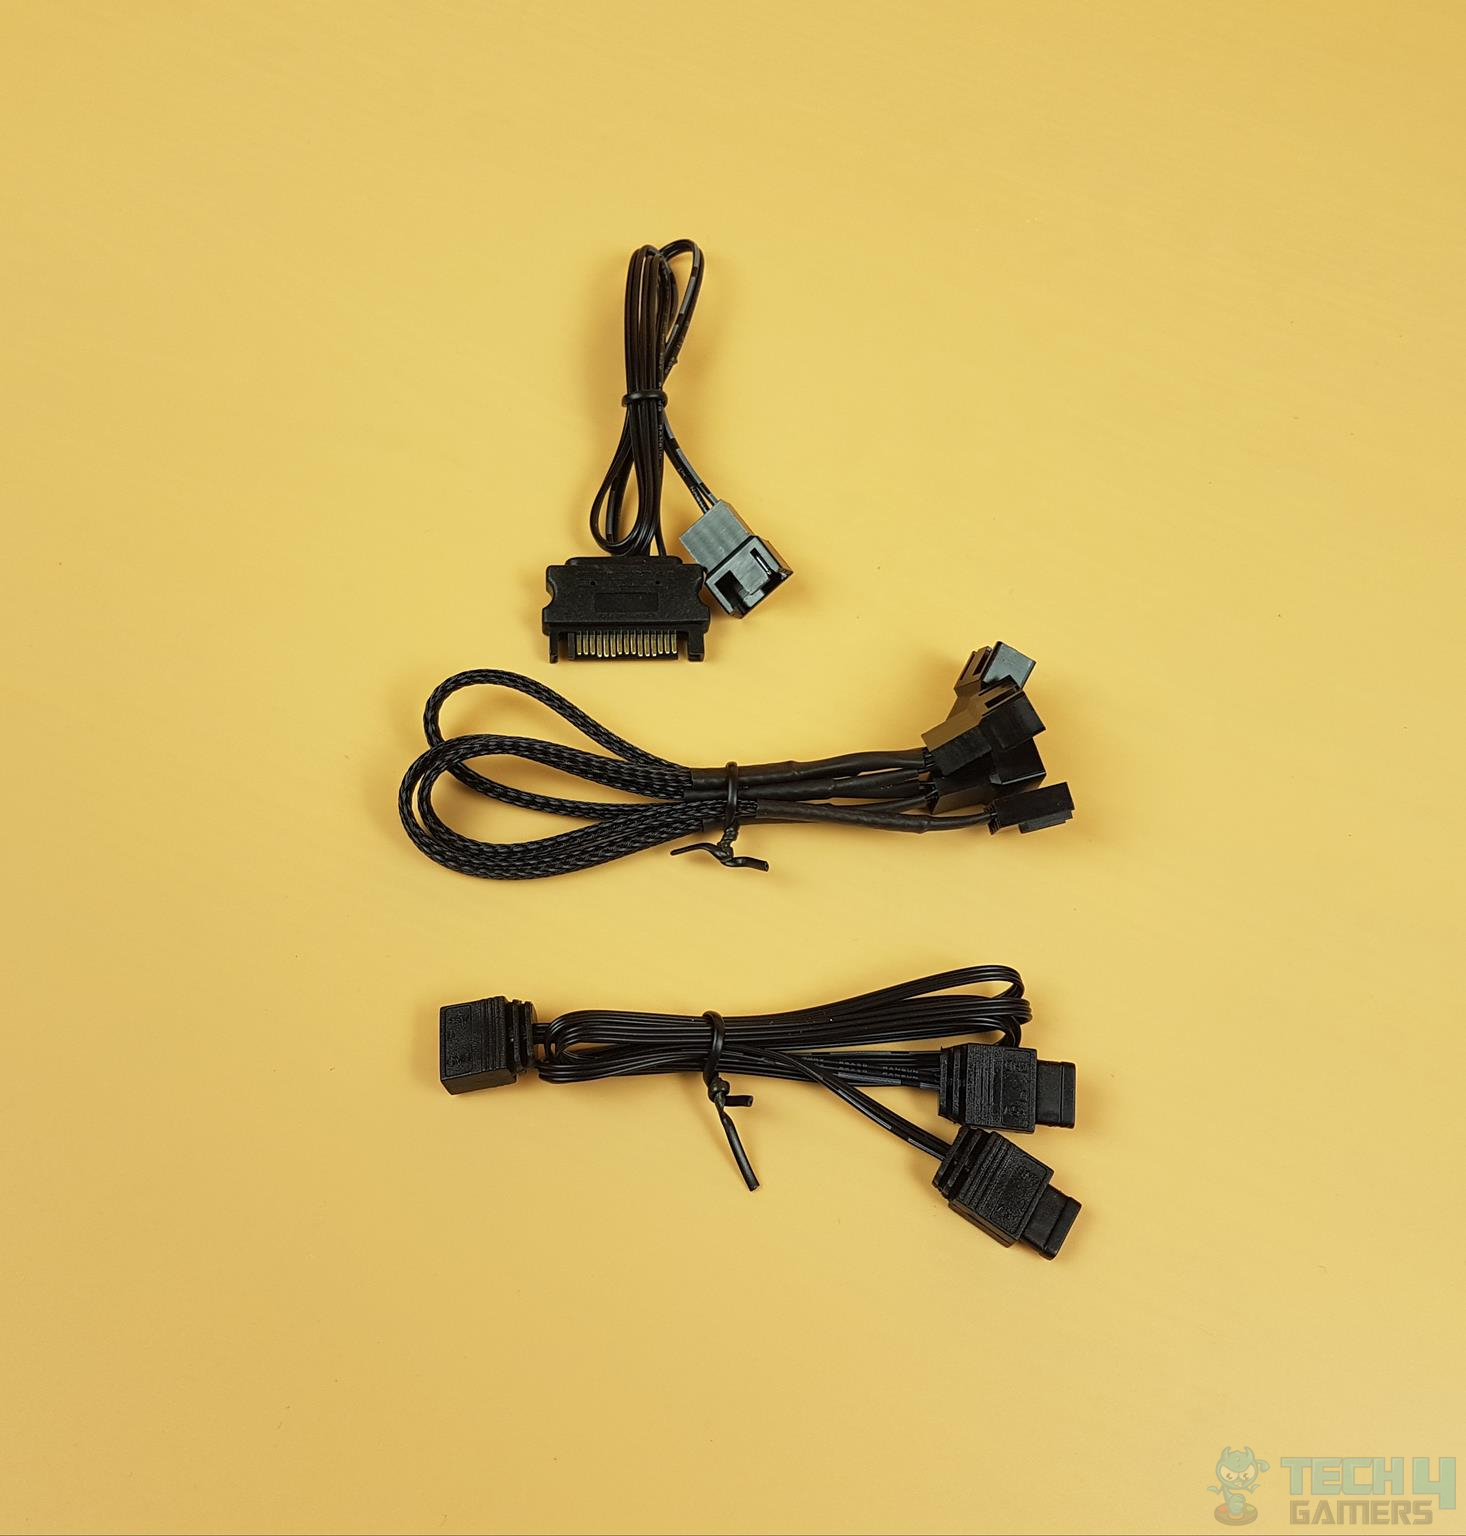 1x SATA cable, 3-Way PWM Splitter Cable, and 1x Y-Cable